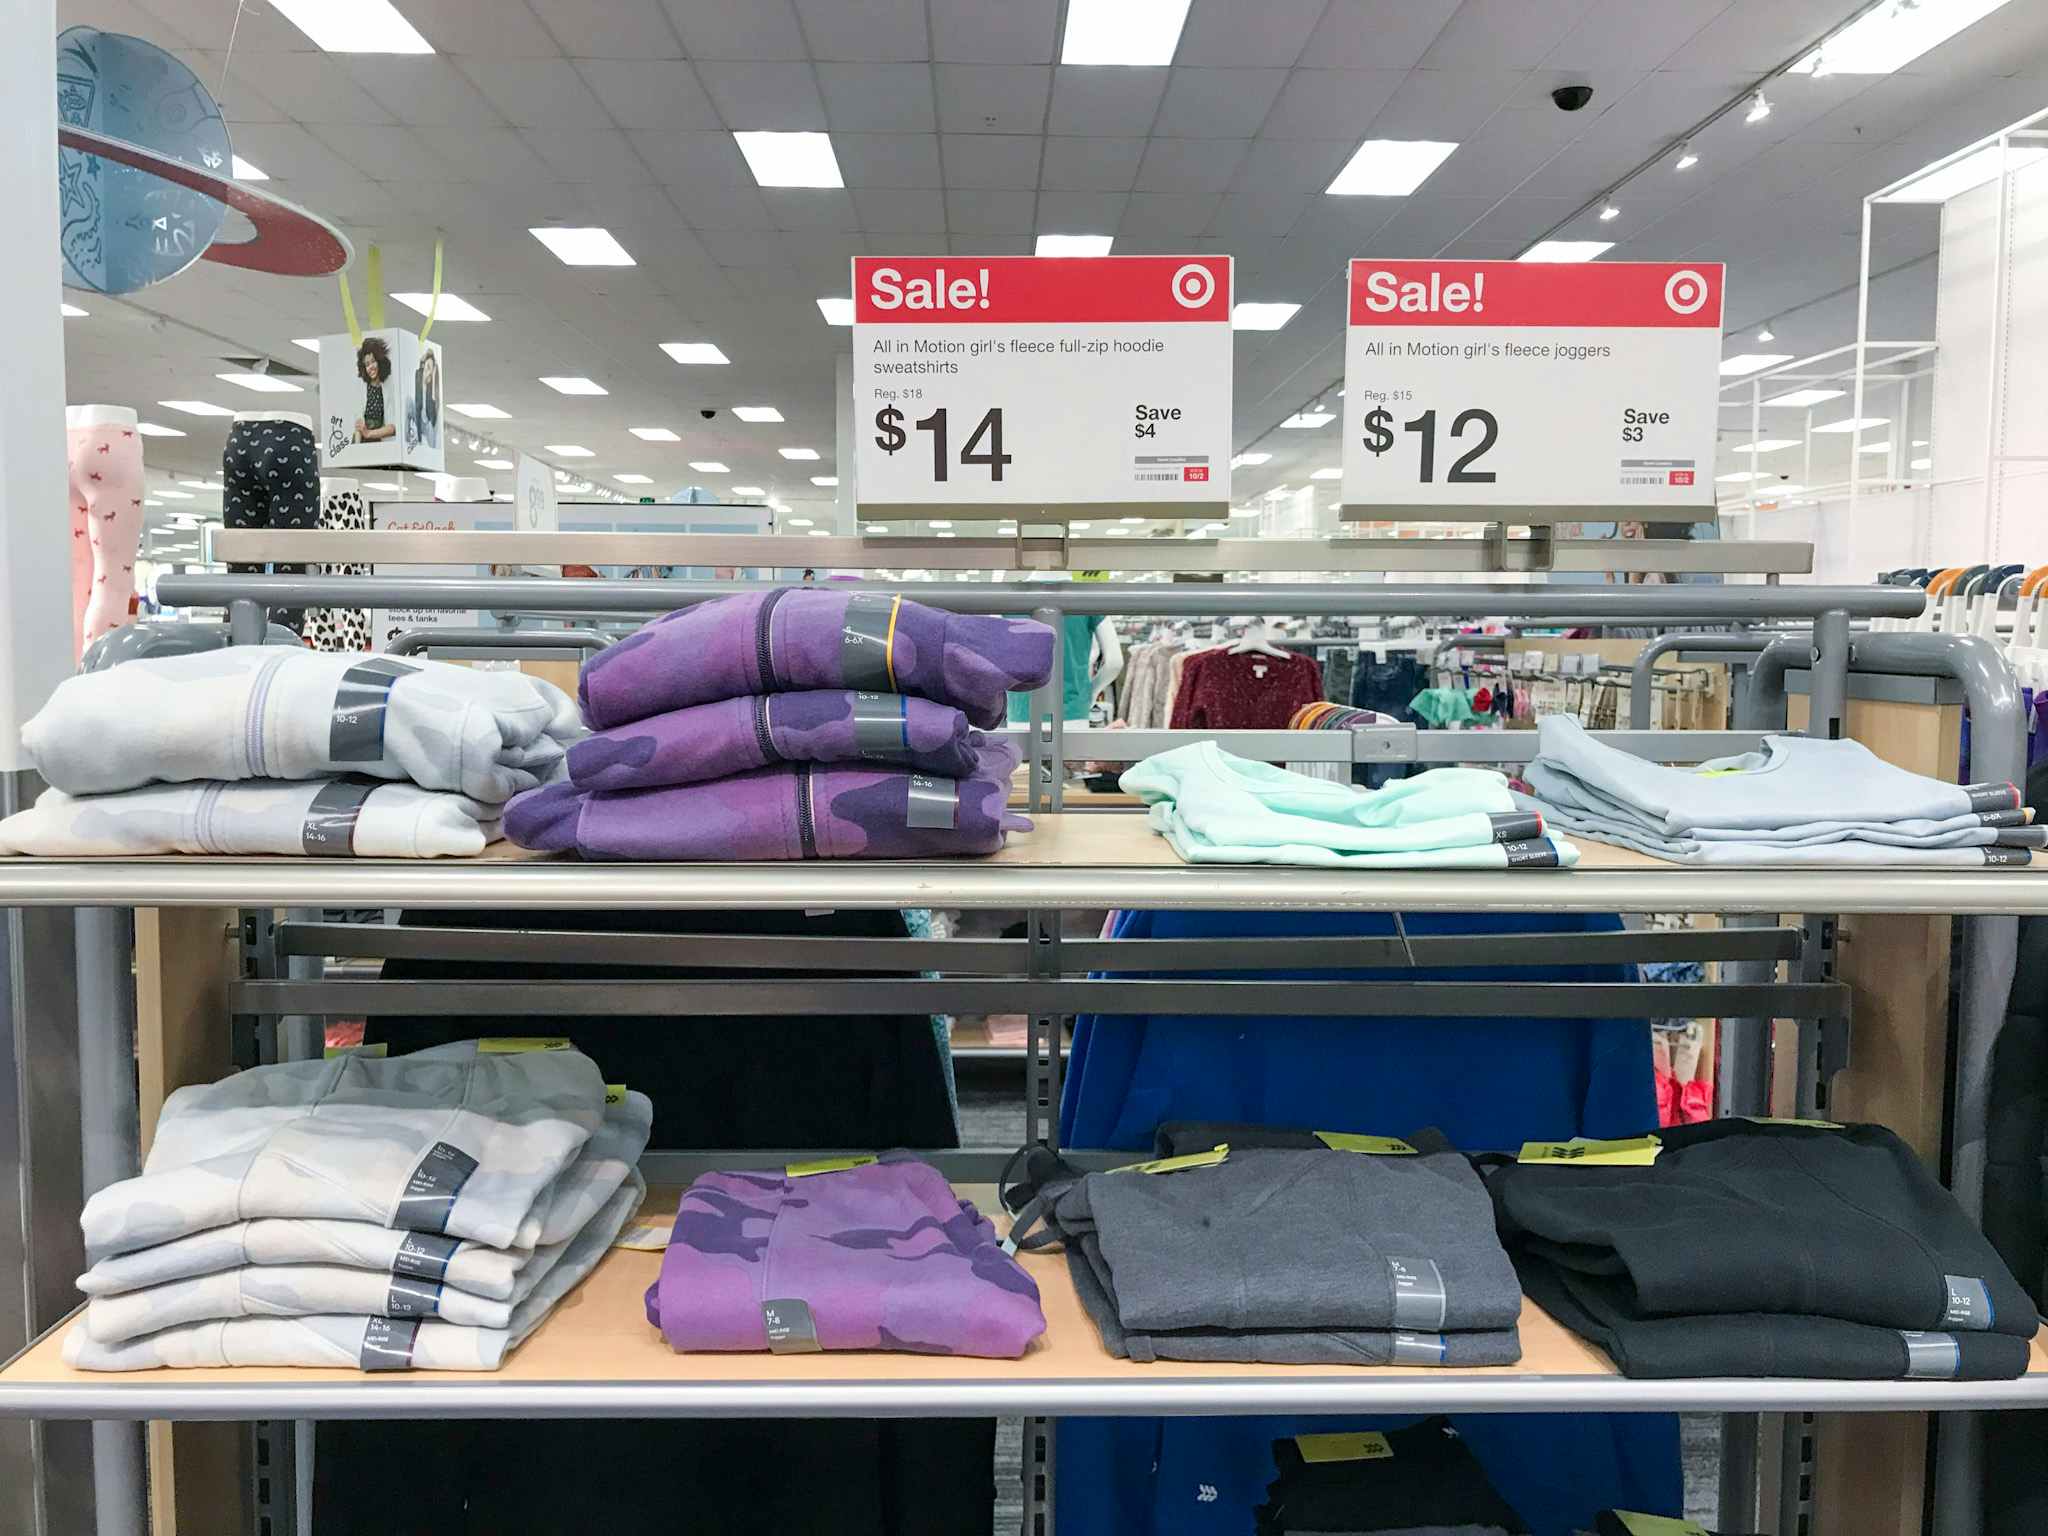 all in motion girls' fleece at target